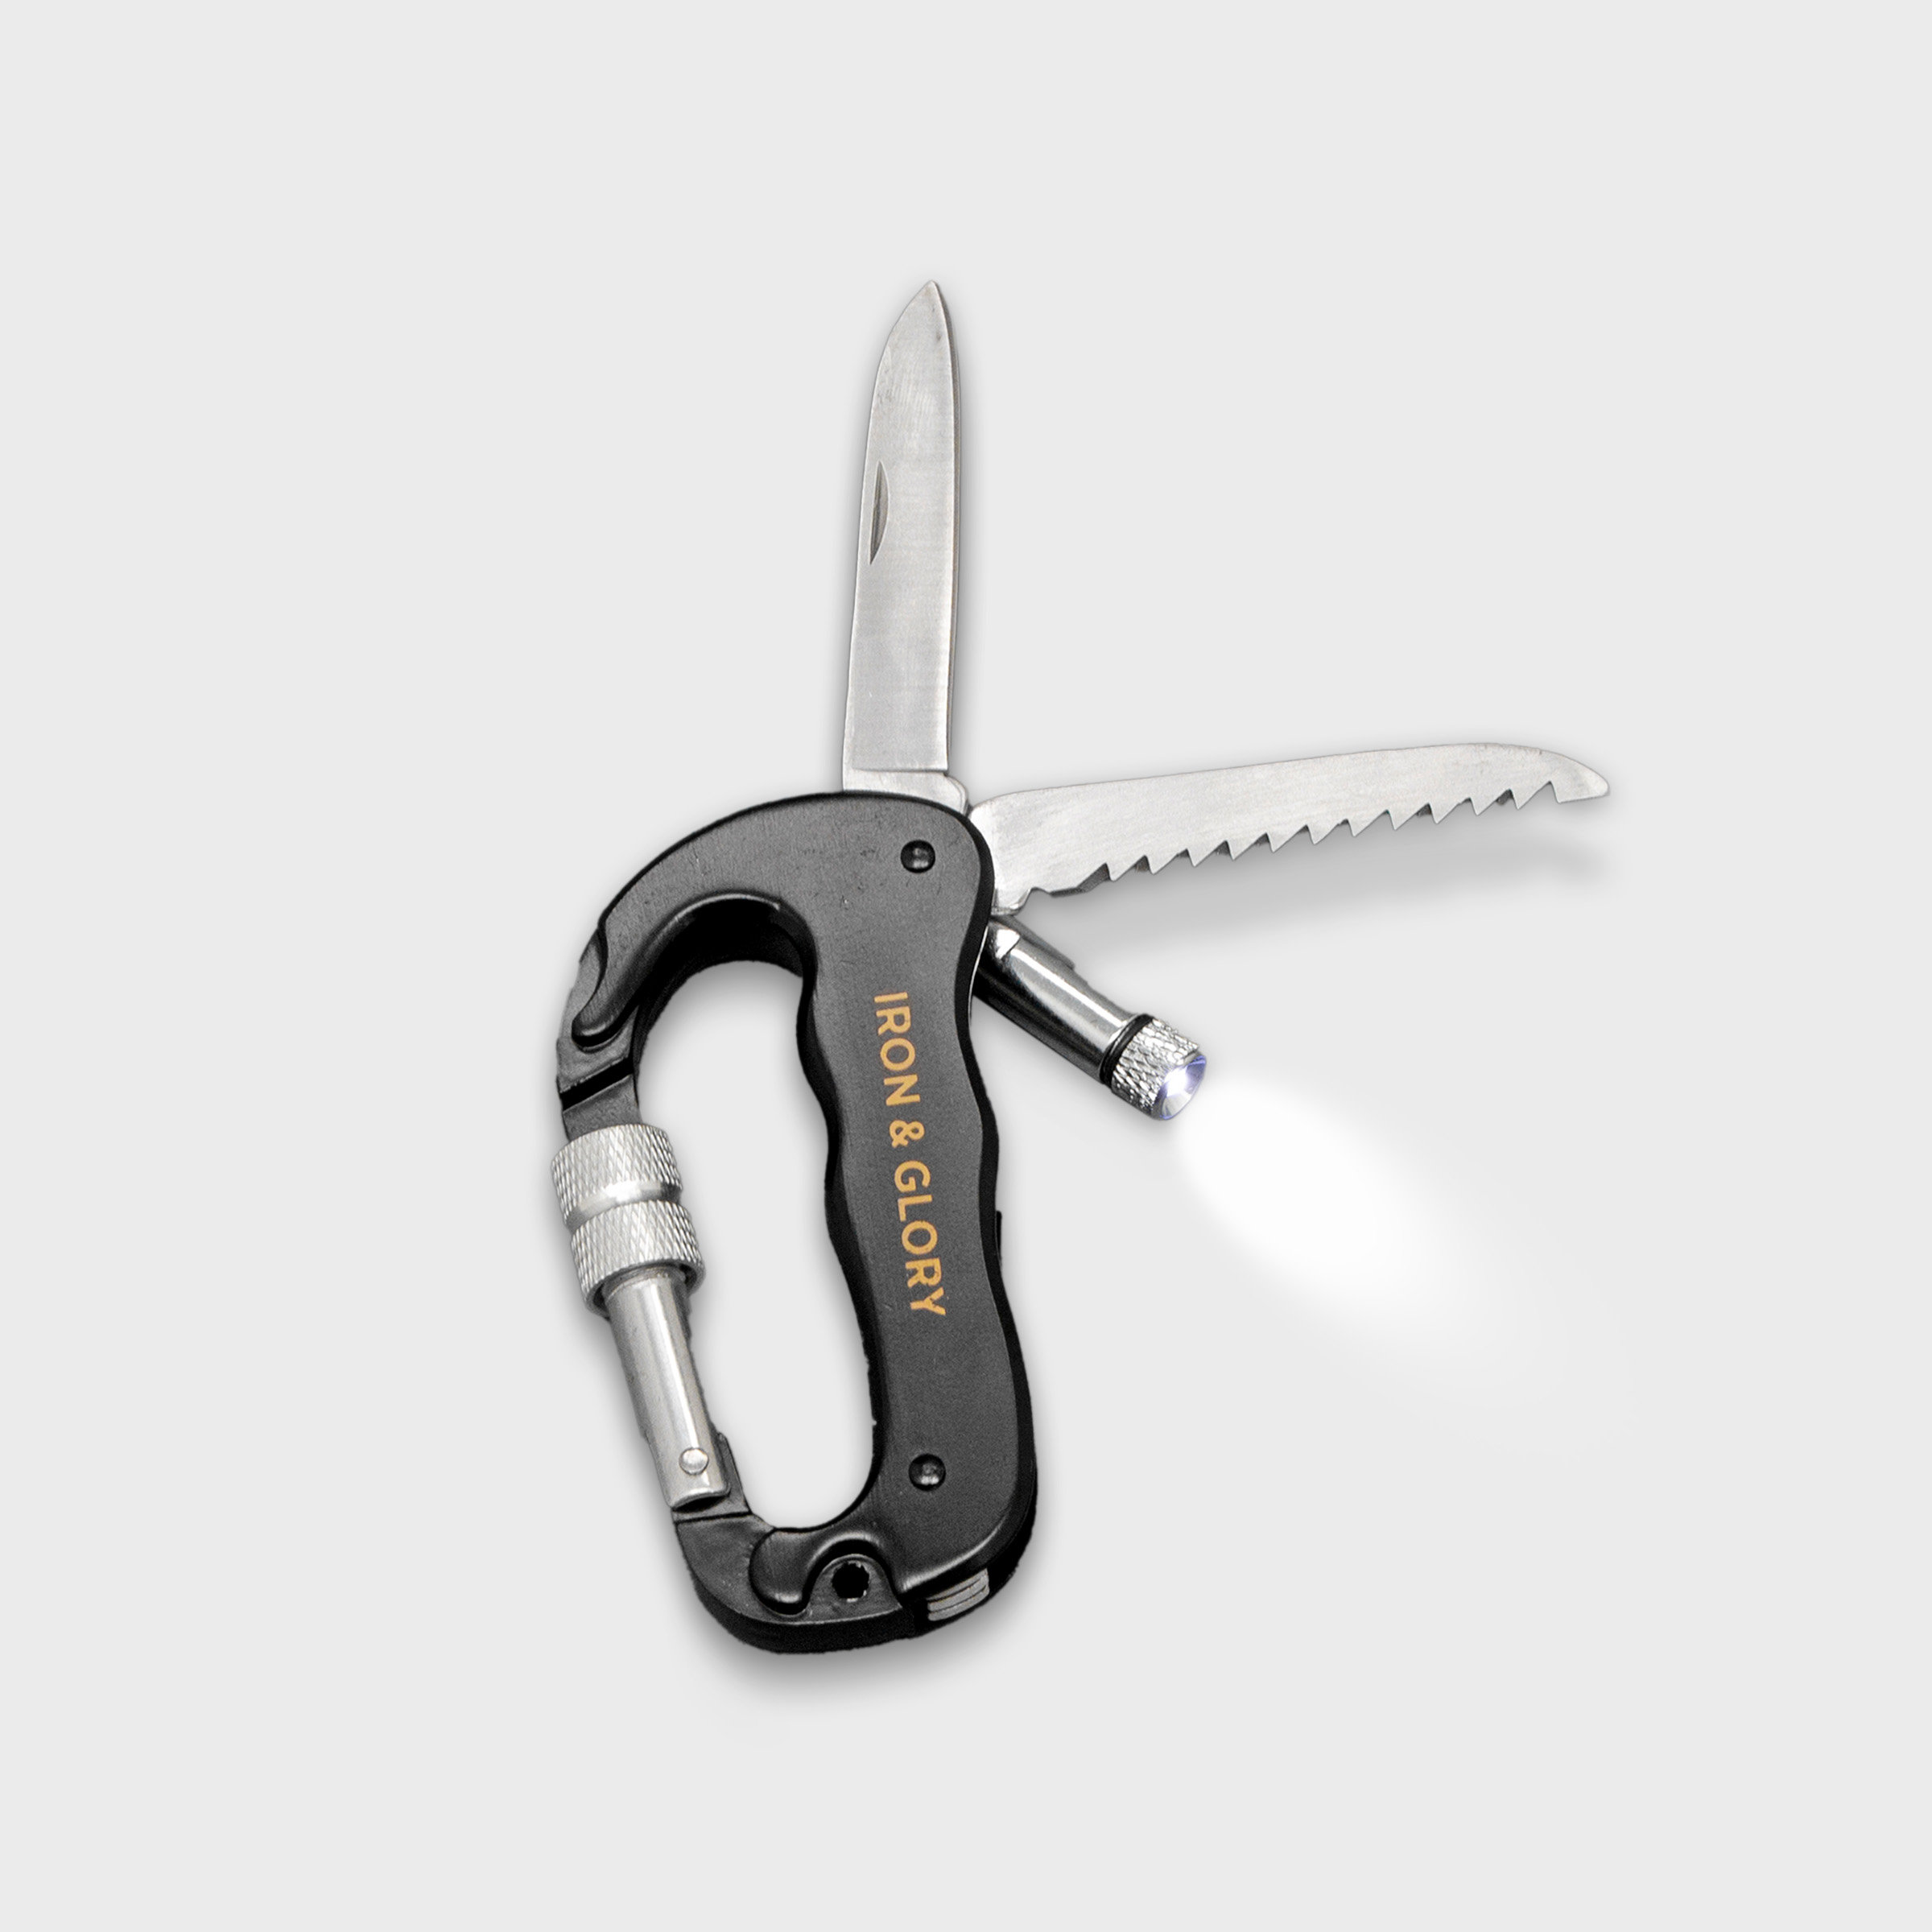 Iron & Glory Carabiner Pocket Knife and torch